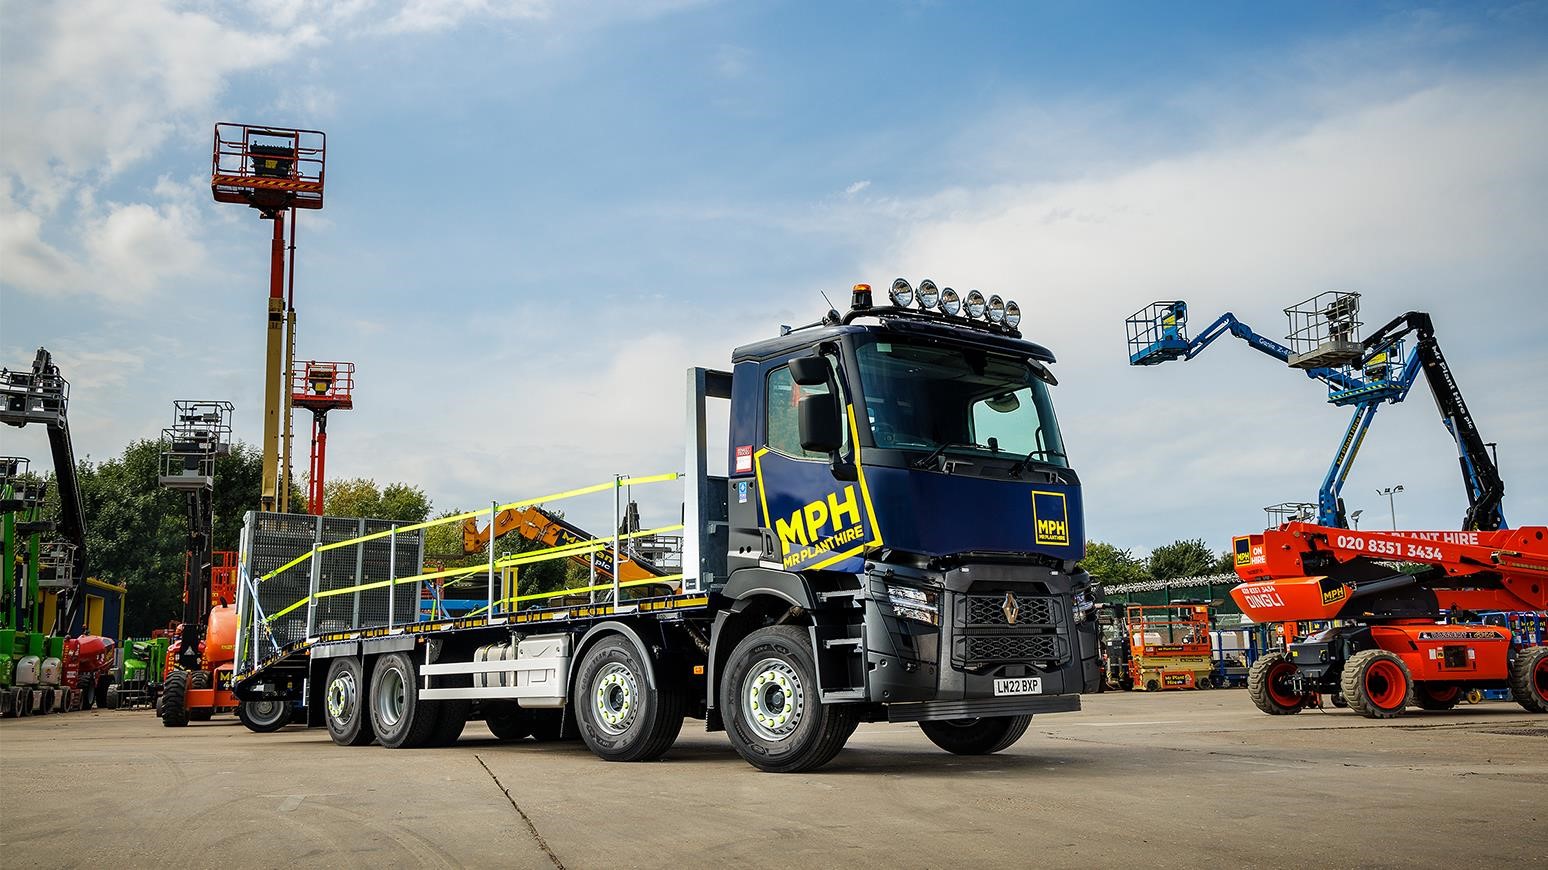 London-Based Mr Plant Hire Takes Delivery Of Renault Trucks C430 Featuring New Company Livery